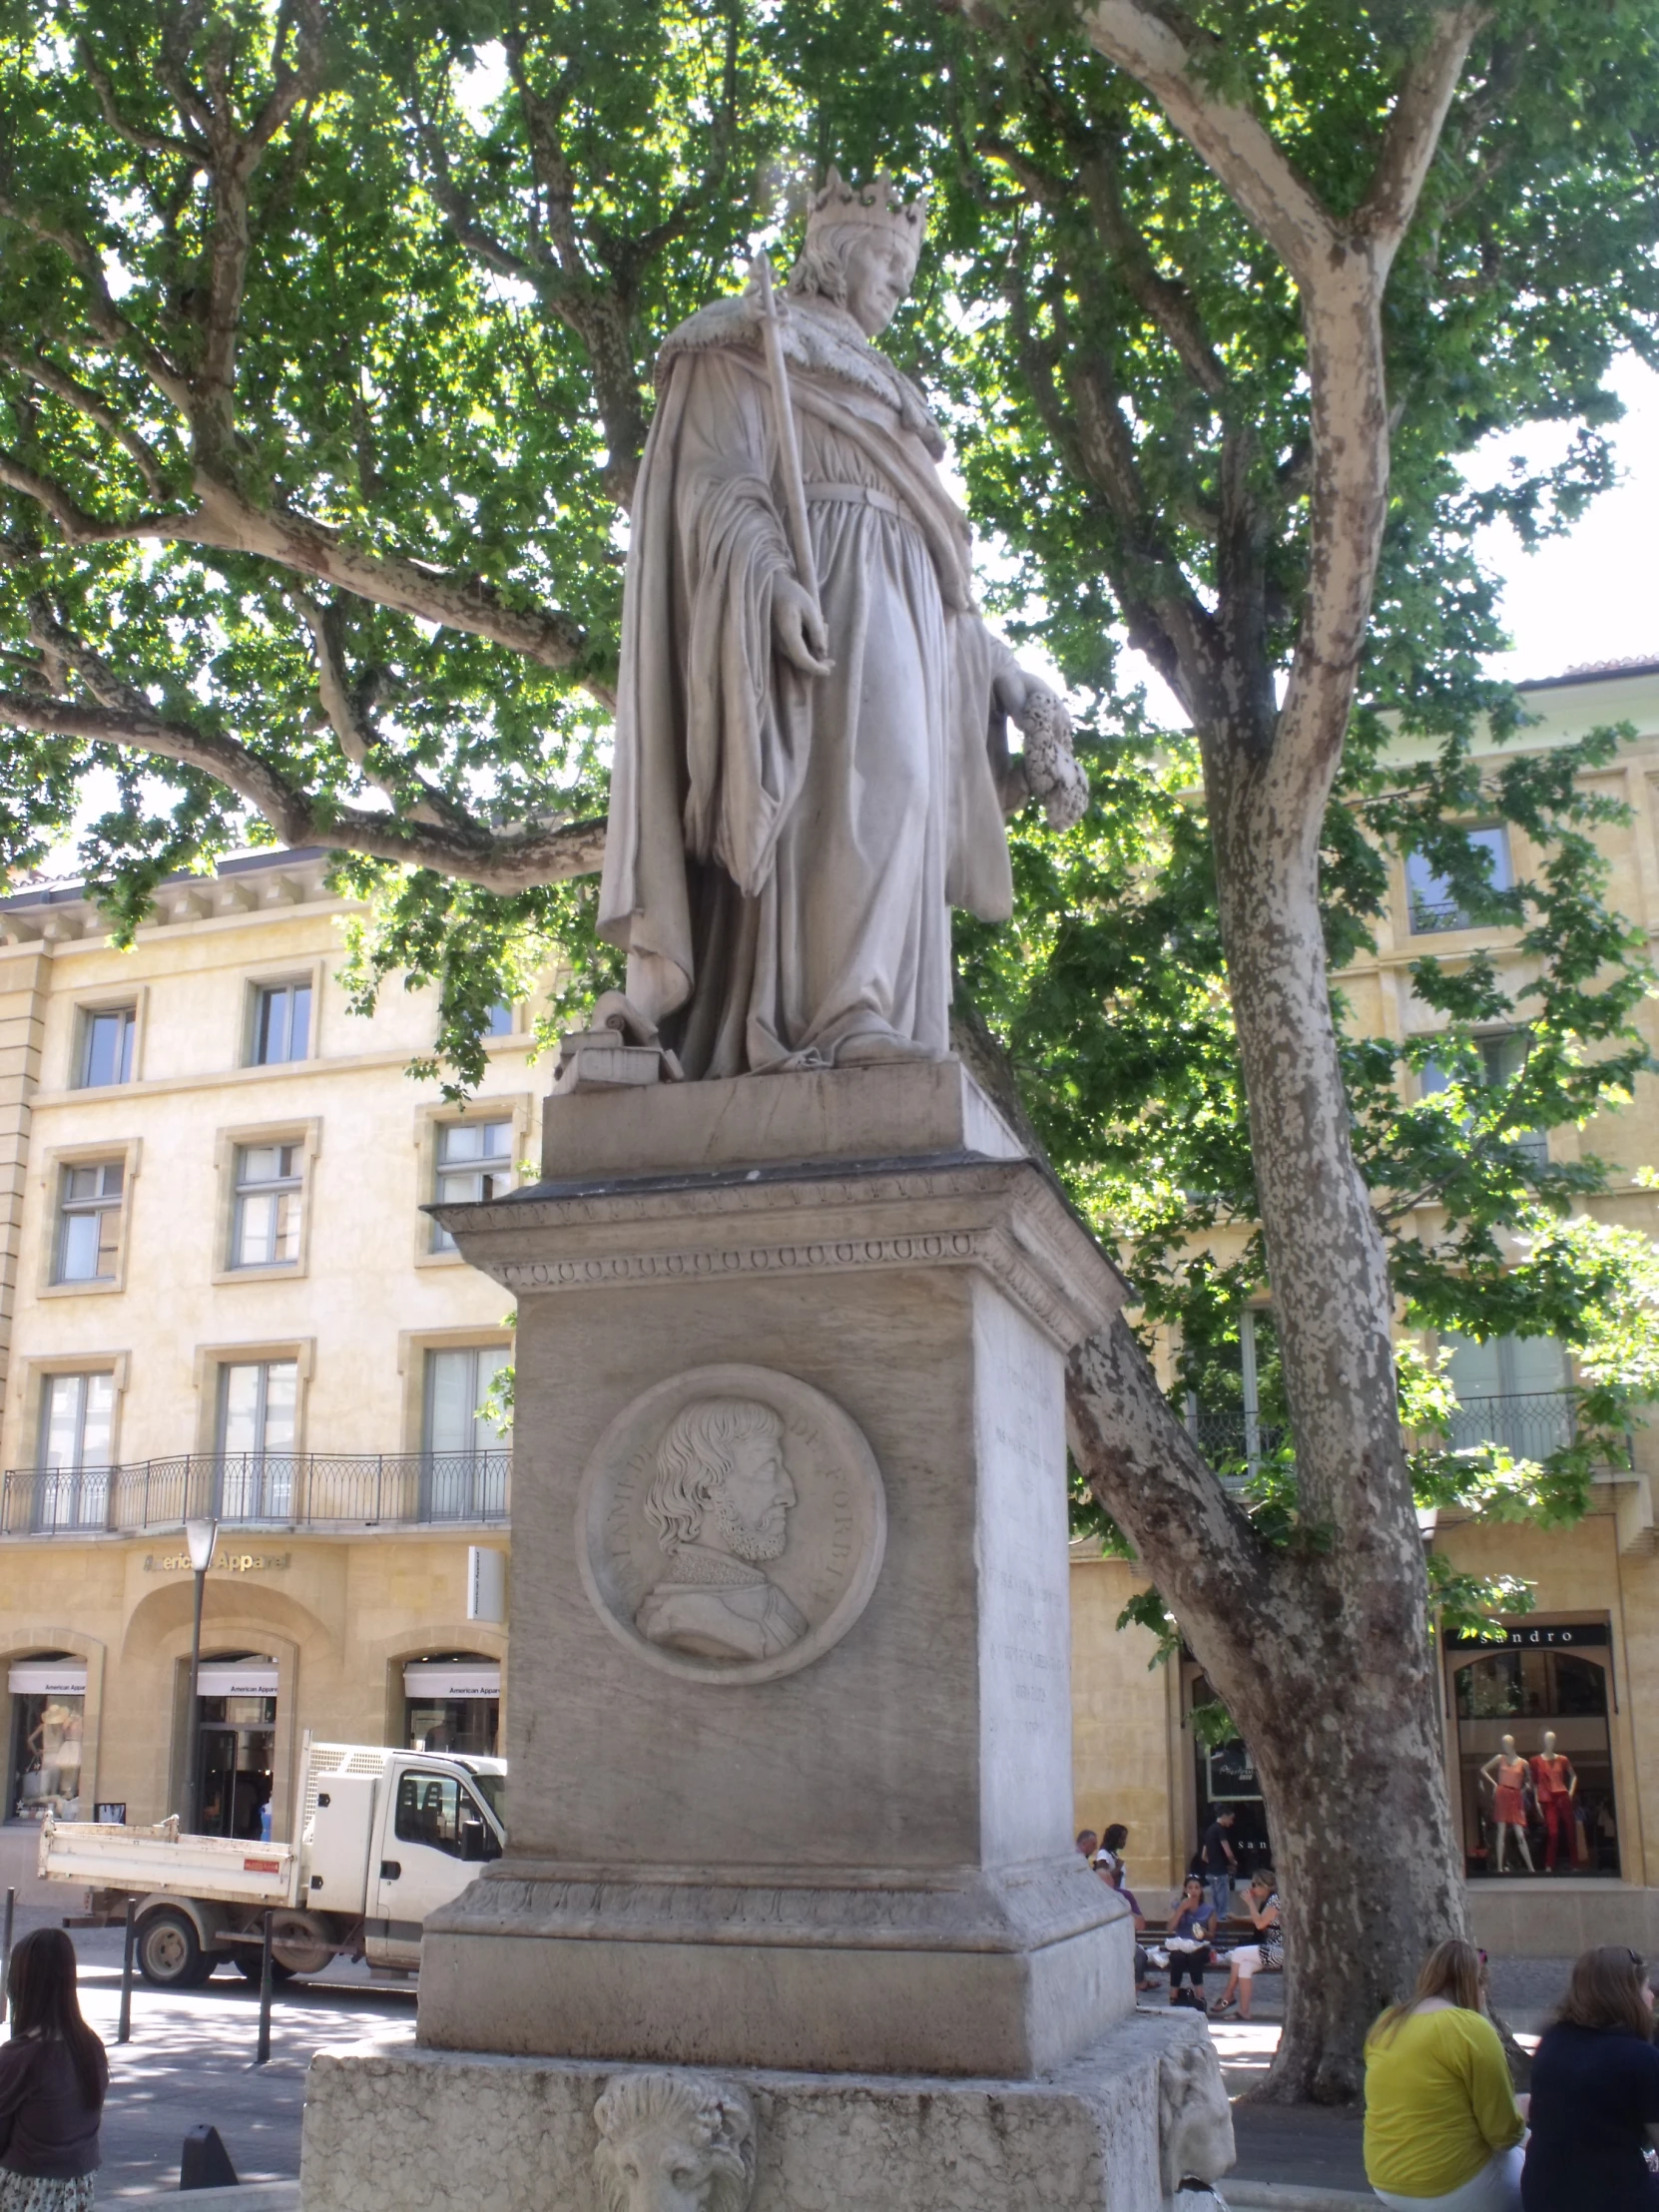 a statue on a pedestal with people gathered around it